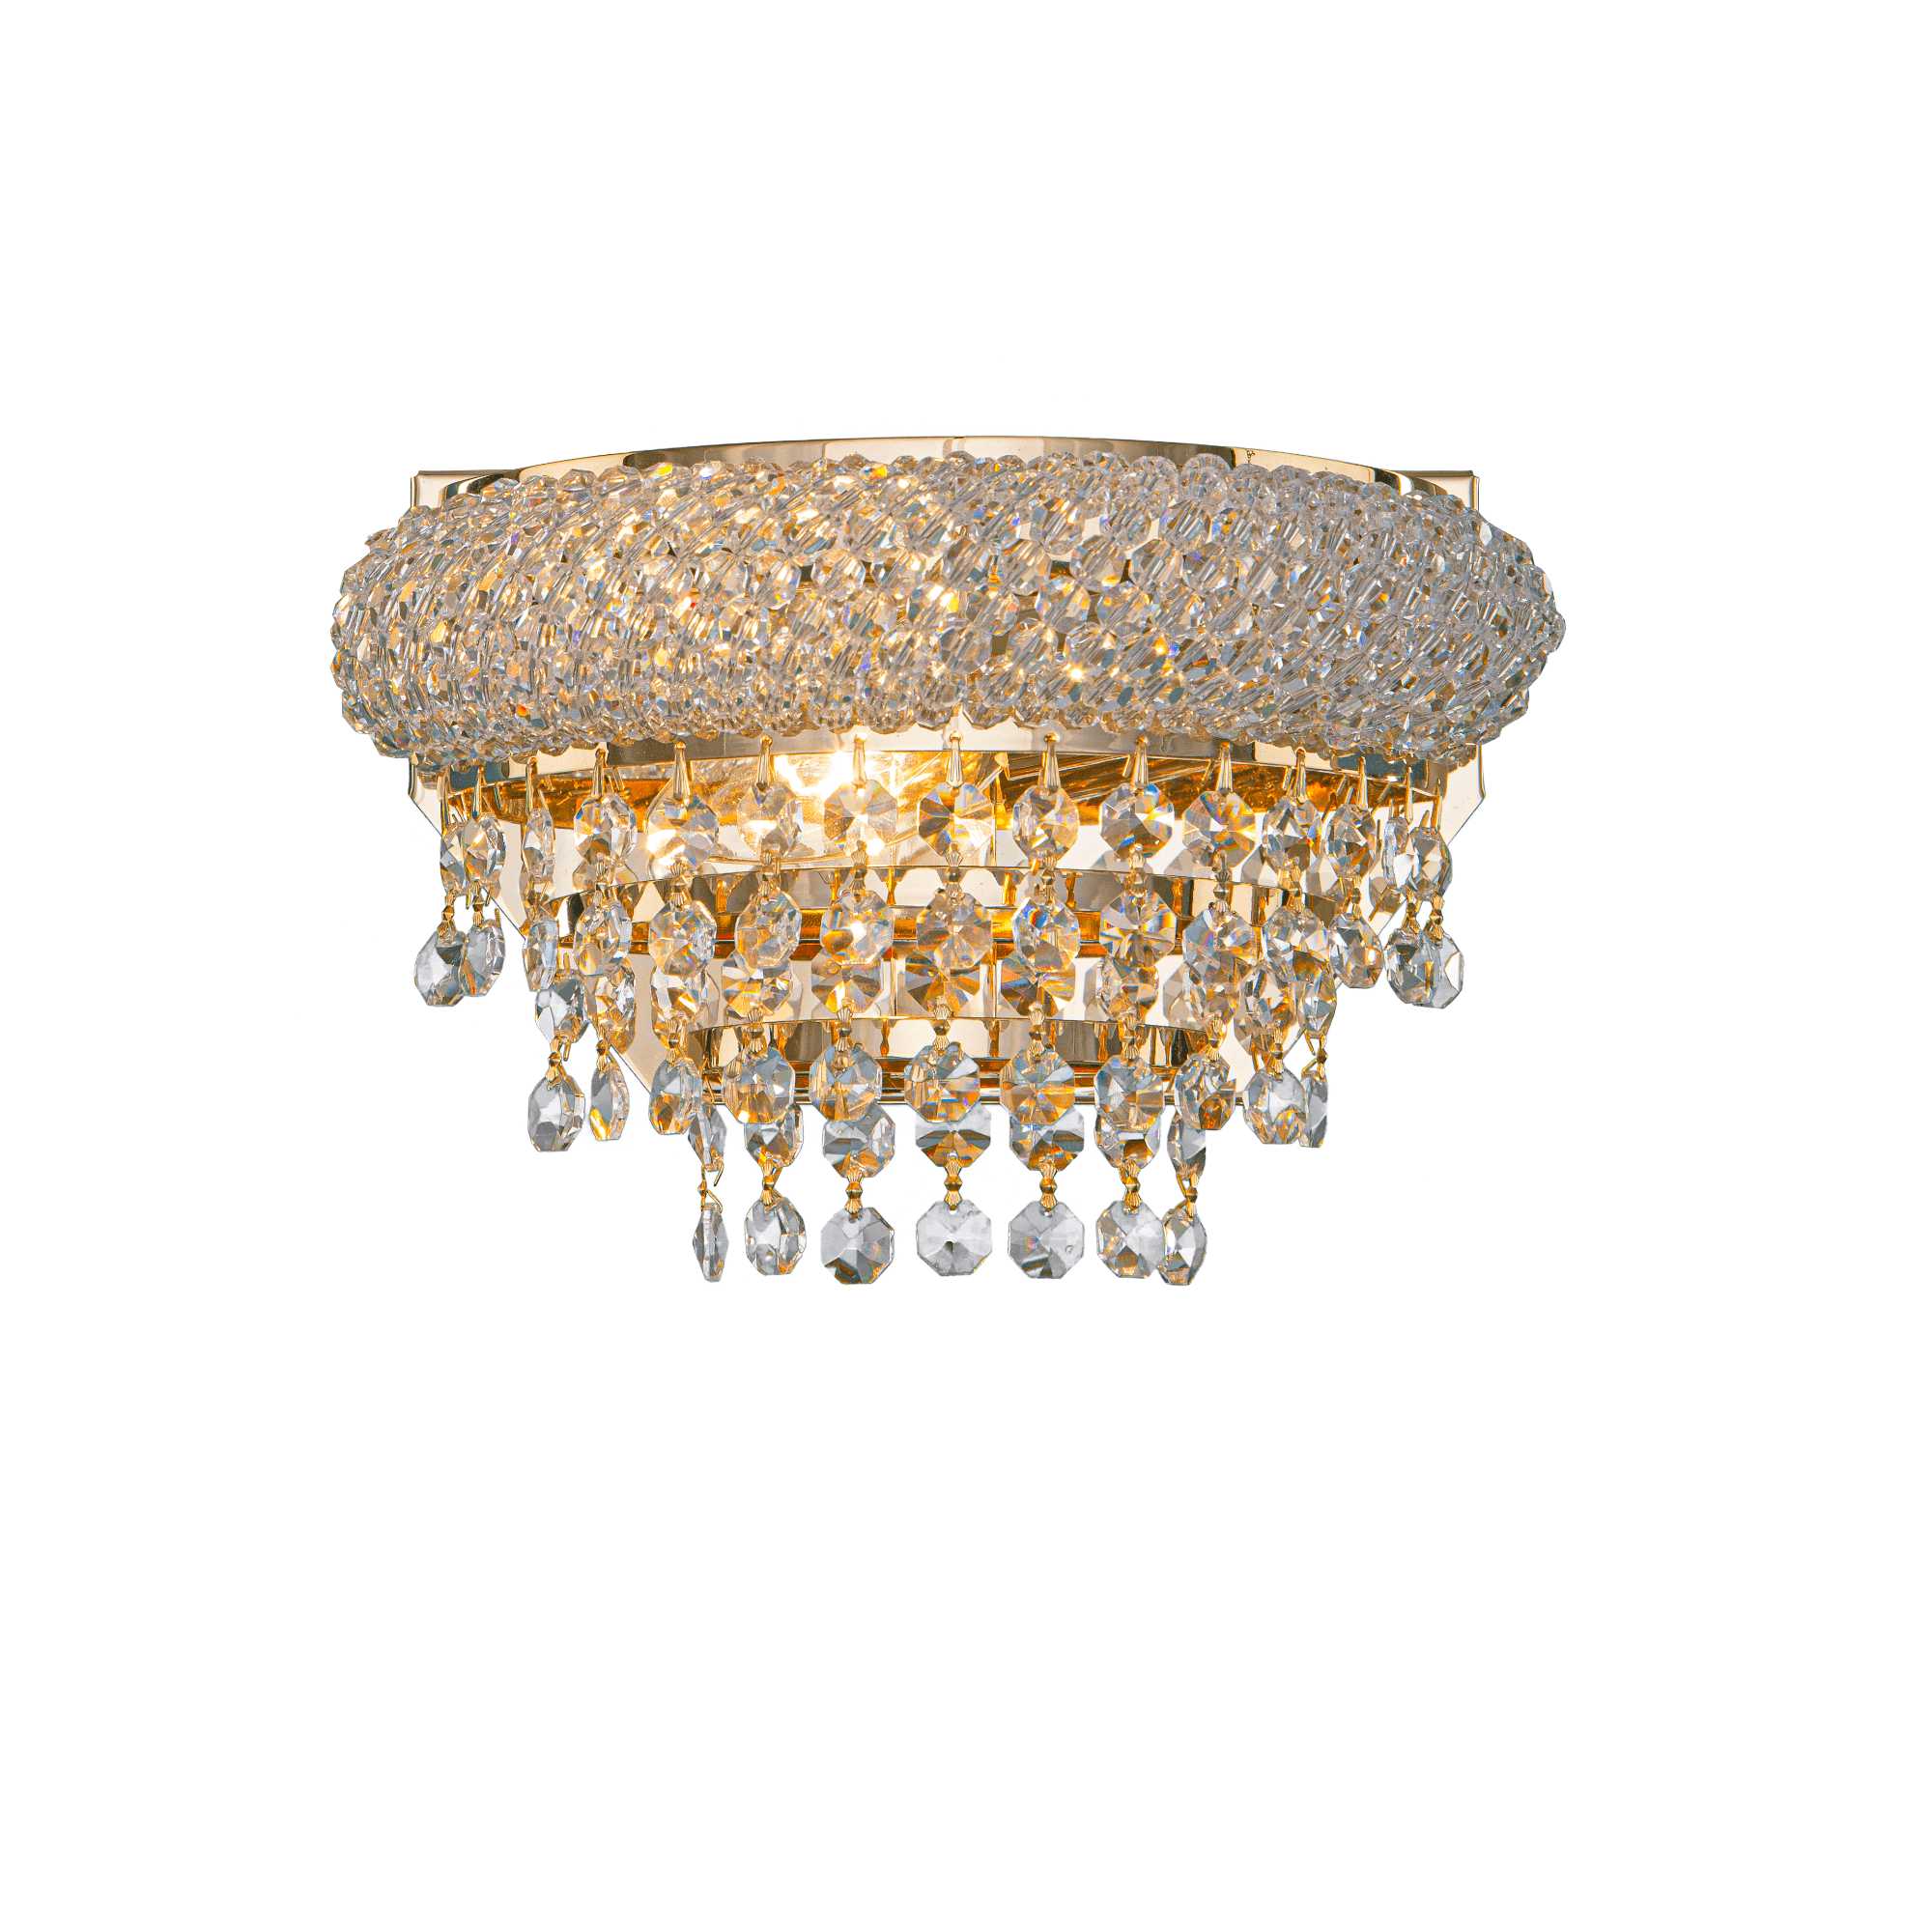 Asfour-Crystal-Lighting-Empire-Collection-Empire-Wall-lamp-1-Bulbs-Gold